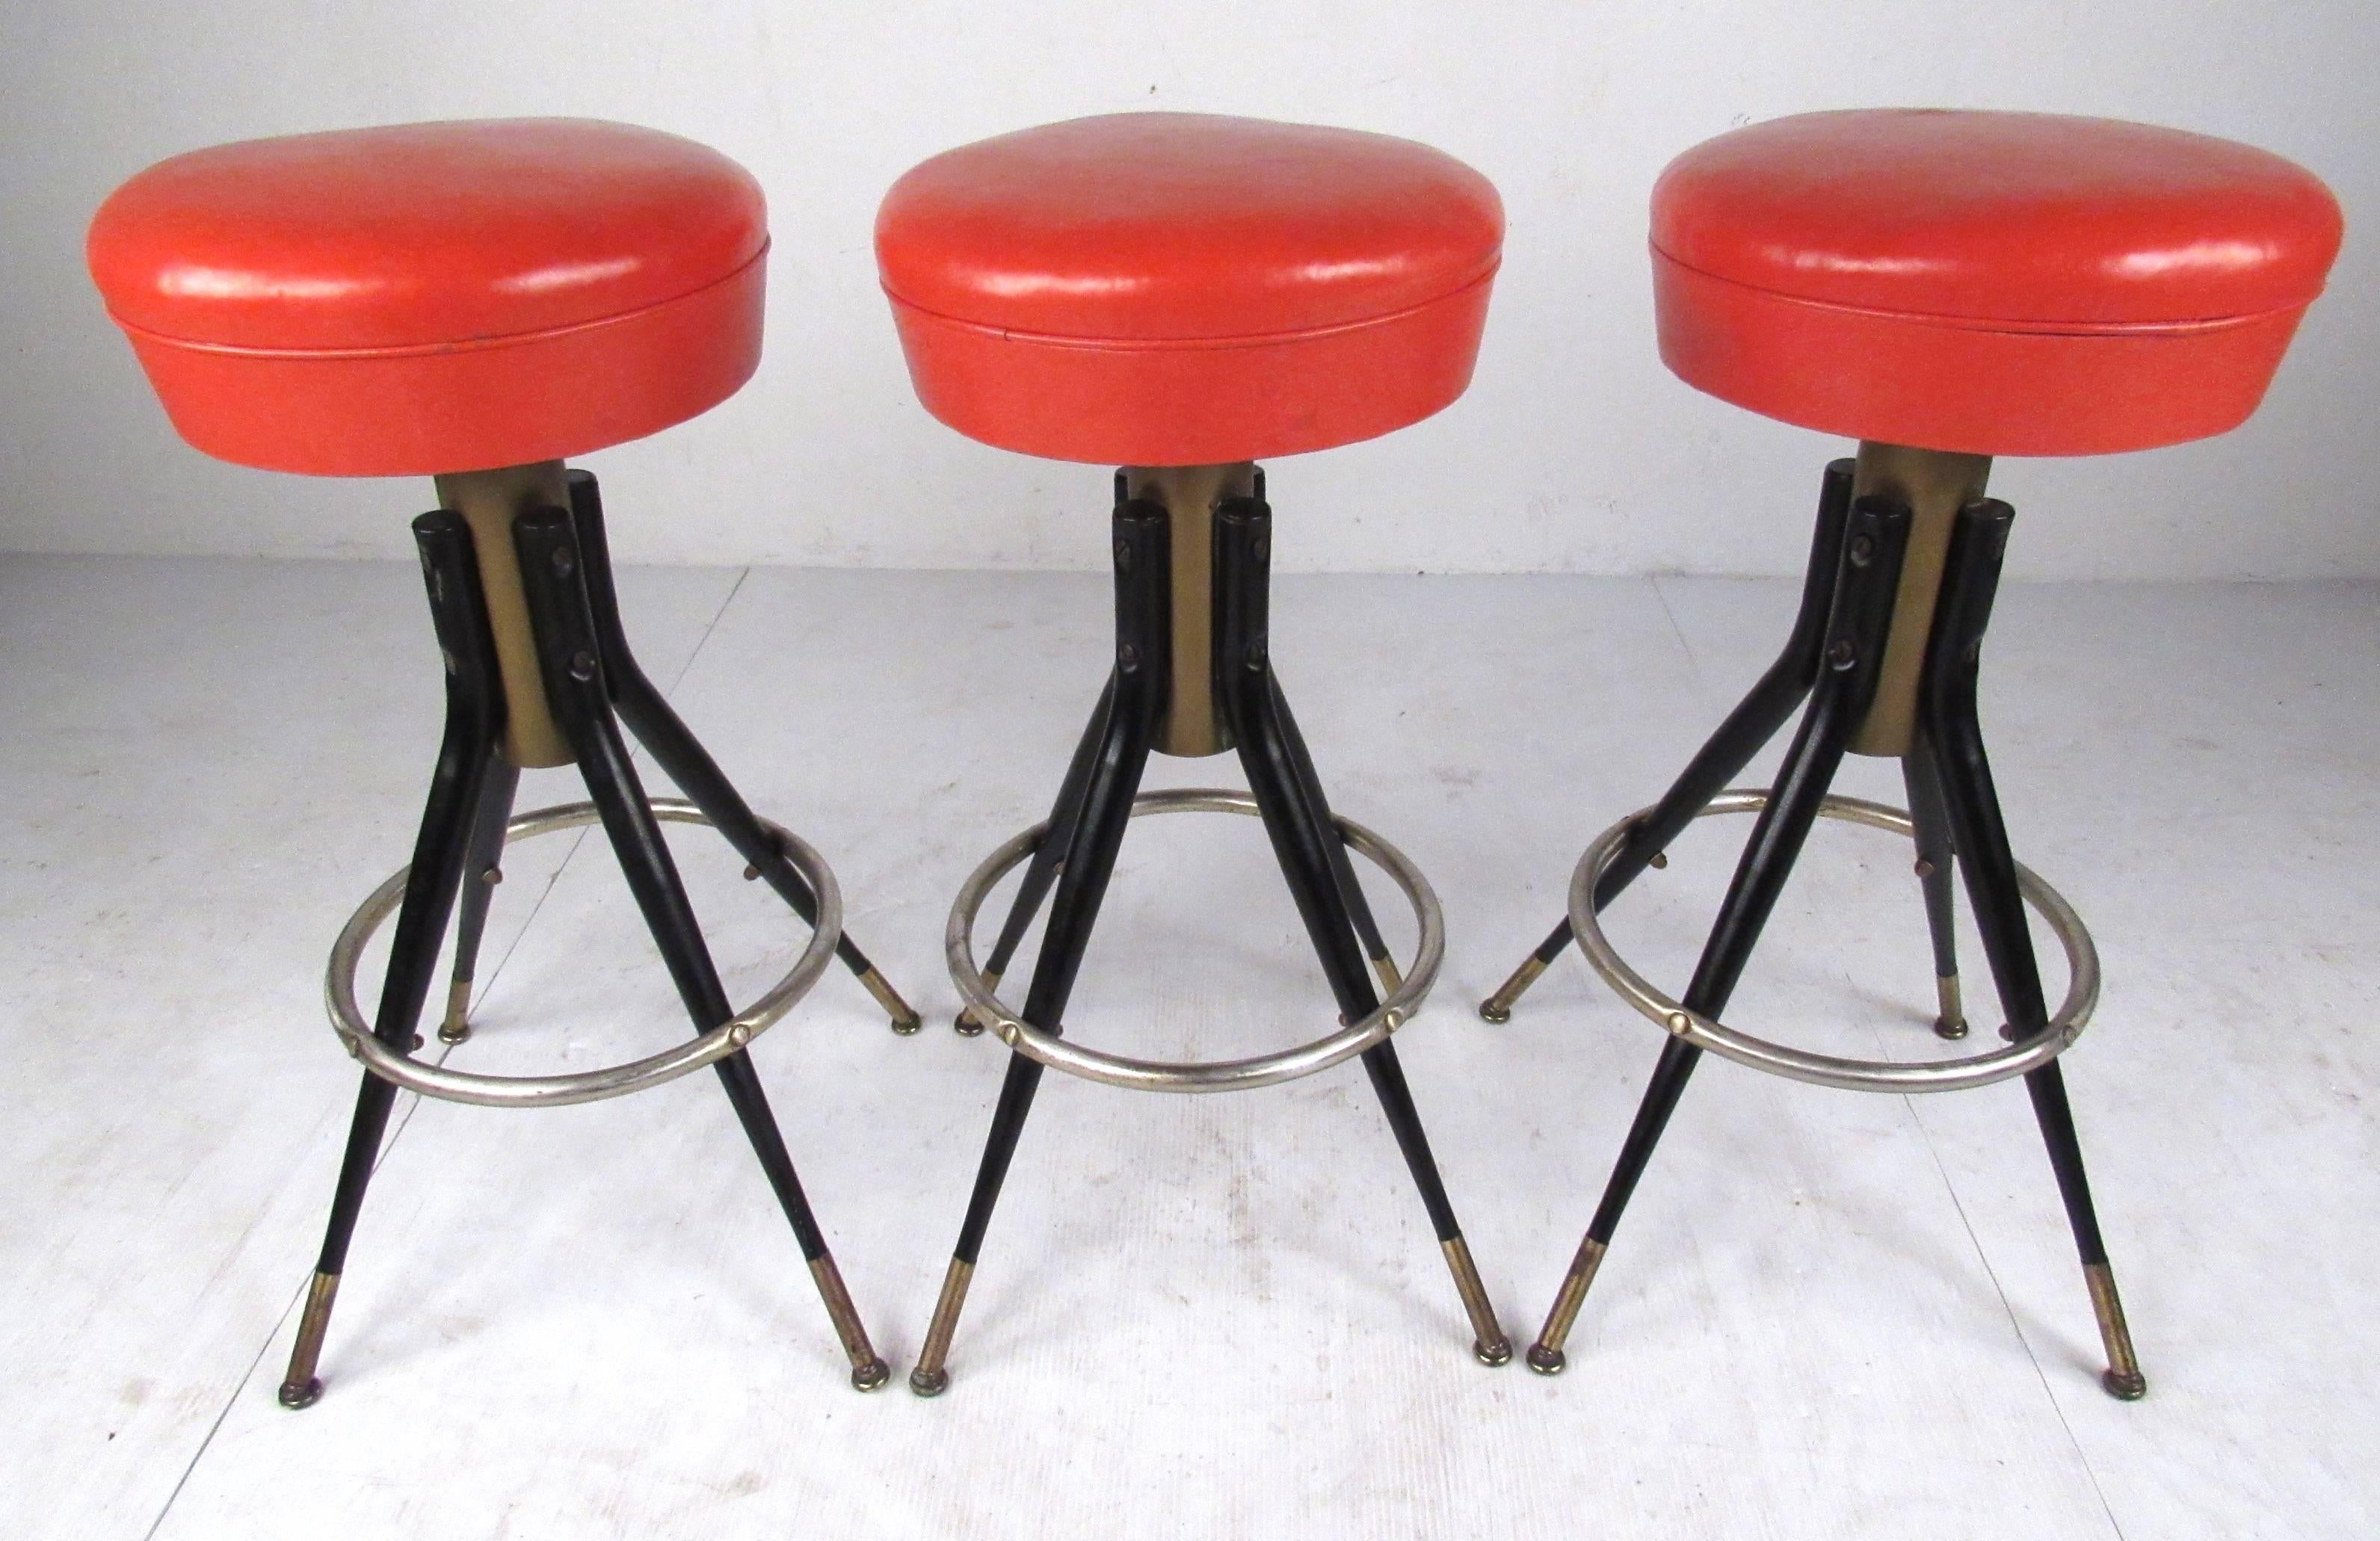 Set of three swivel stools with bright orange vinyl seats from the L & B Products Corp., Brooklyn, NY. Very well constructed with metal base and legs, footrest, and brass sabots. Nice retro look with a combination of industrial and midcentury